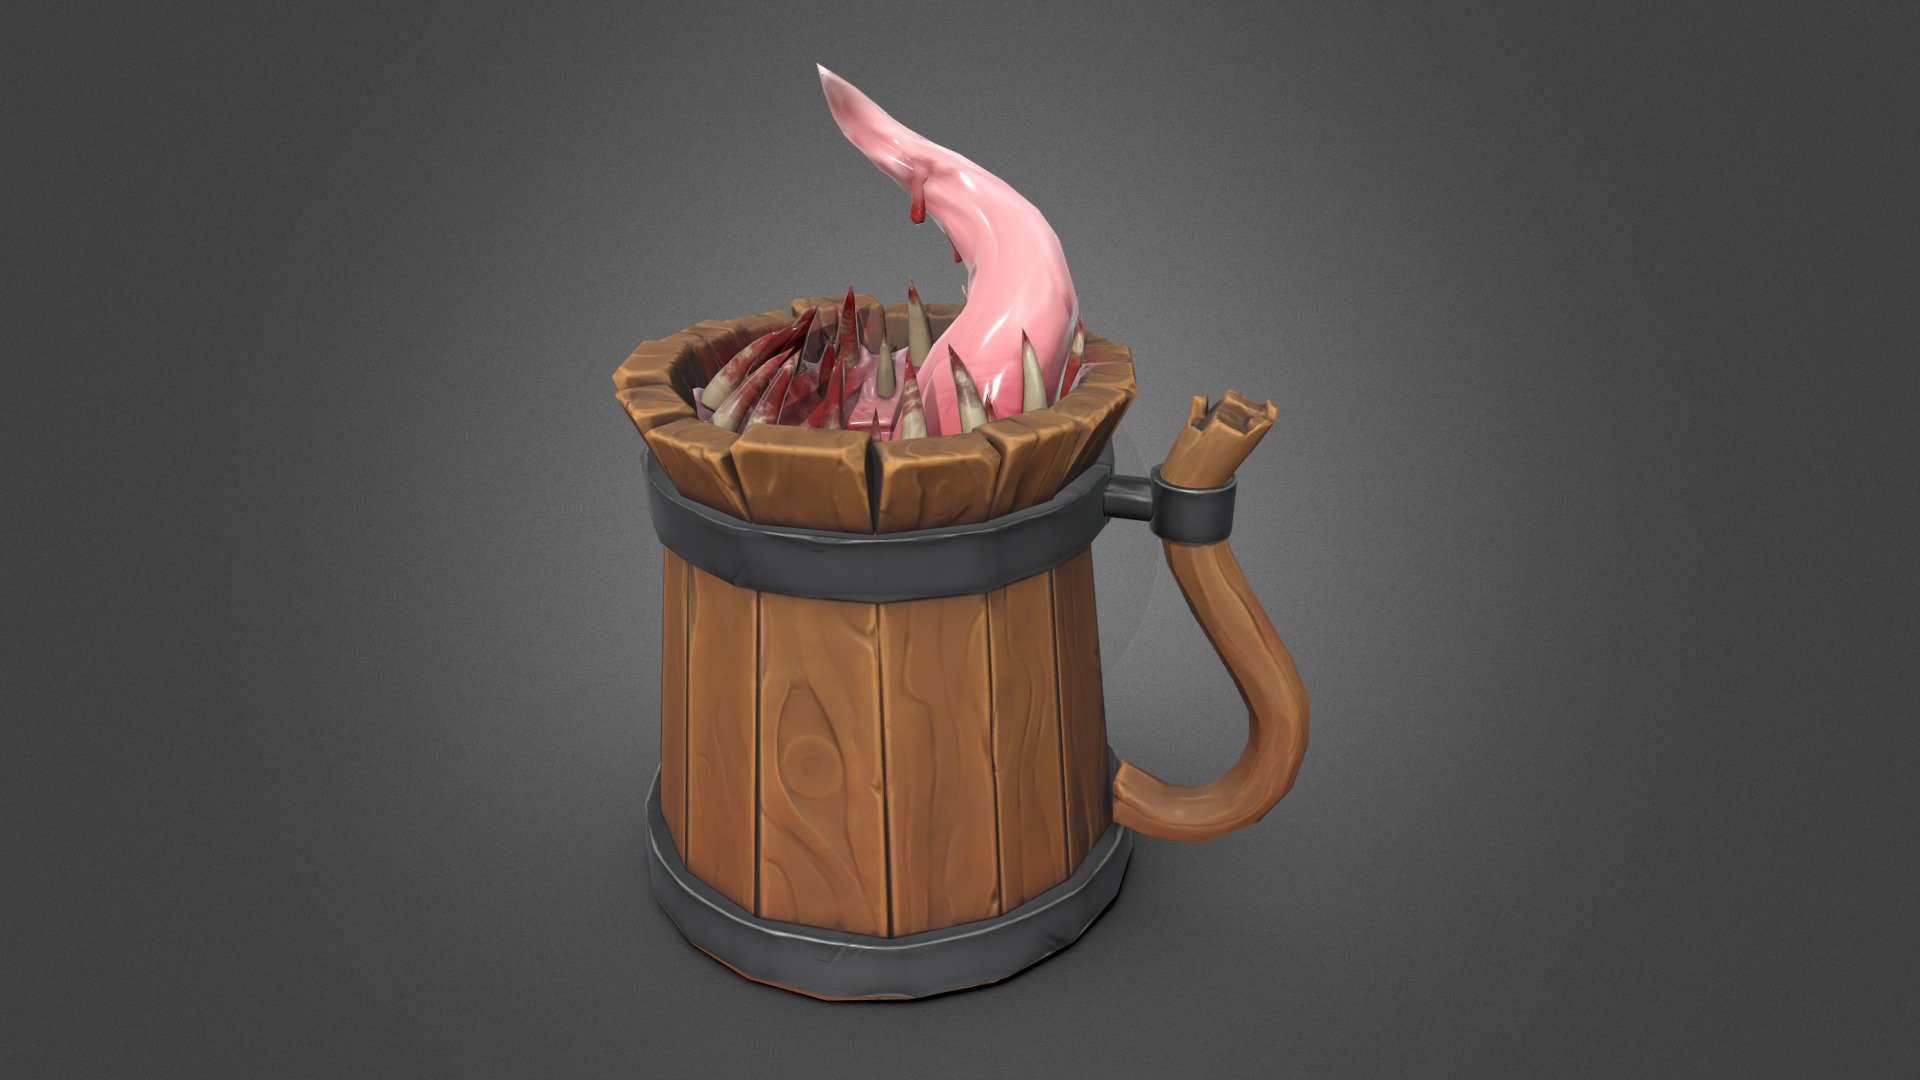 A mimic mug that's been floating around in my head for a while and decided to work out in a shorter timespan than my usual works. This is the bloody version, with a clean version being available here - Mimic mug (bloody version) - 3D model by Syllver 3d model